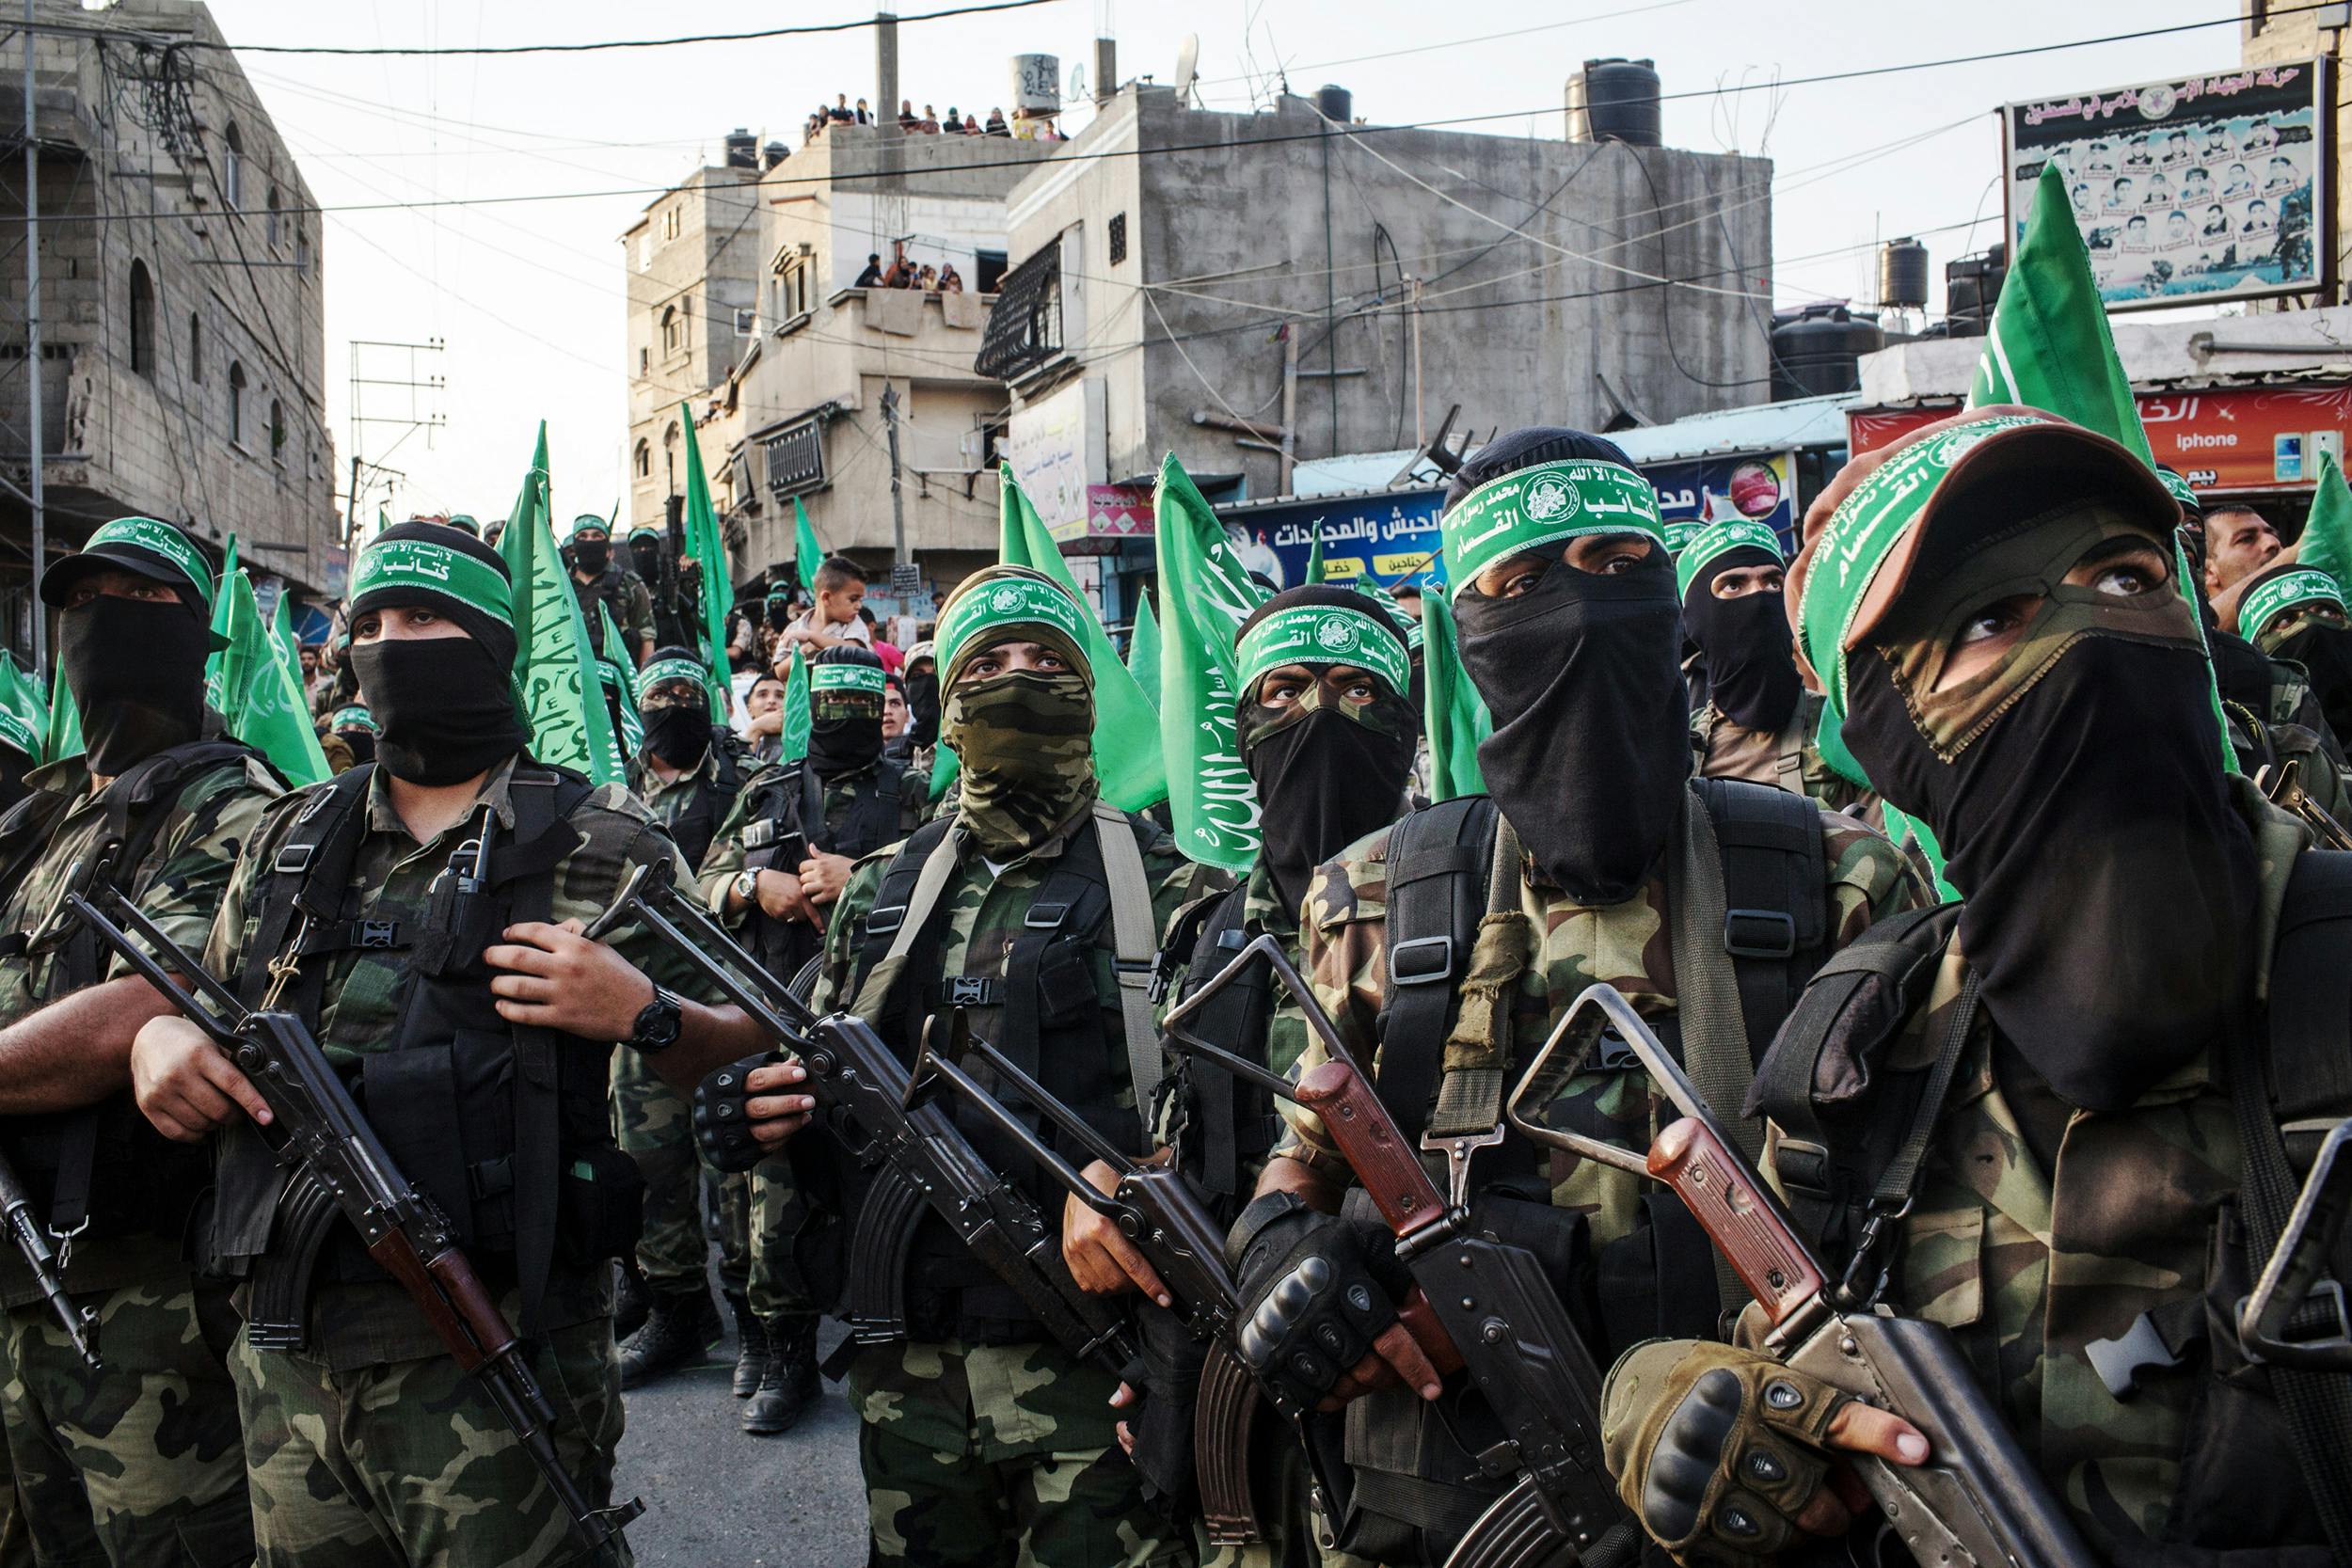 This war is not about Hamas